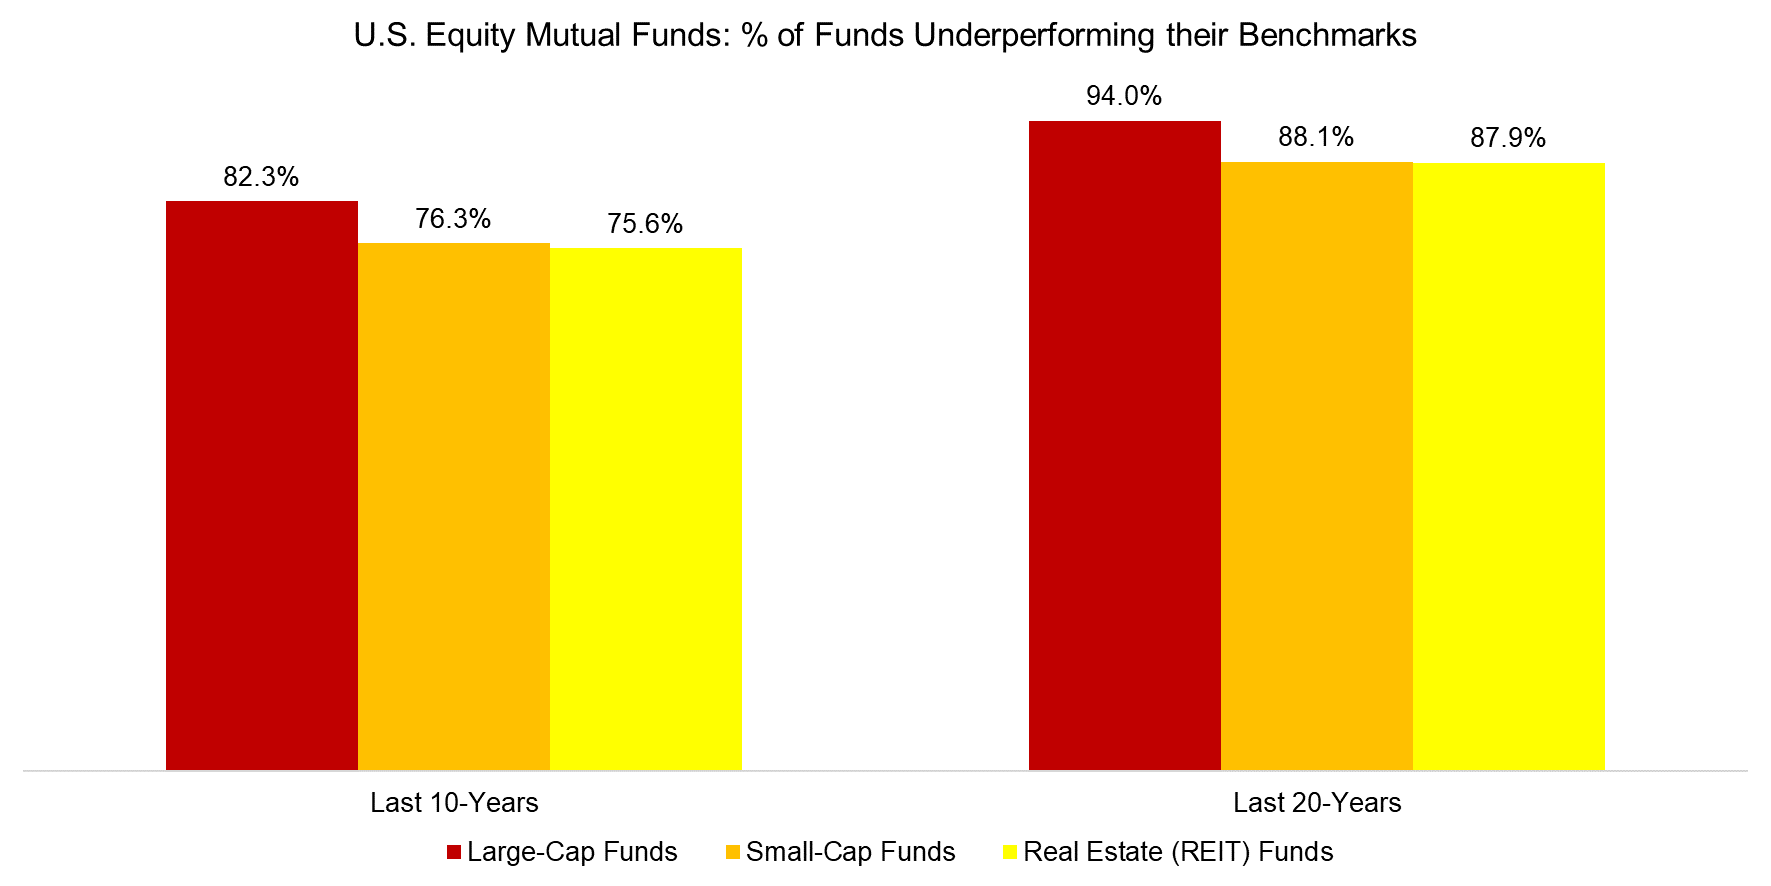 U.S. Equity Mutual Funds % of Funds Underperforming their Benchmarks